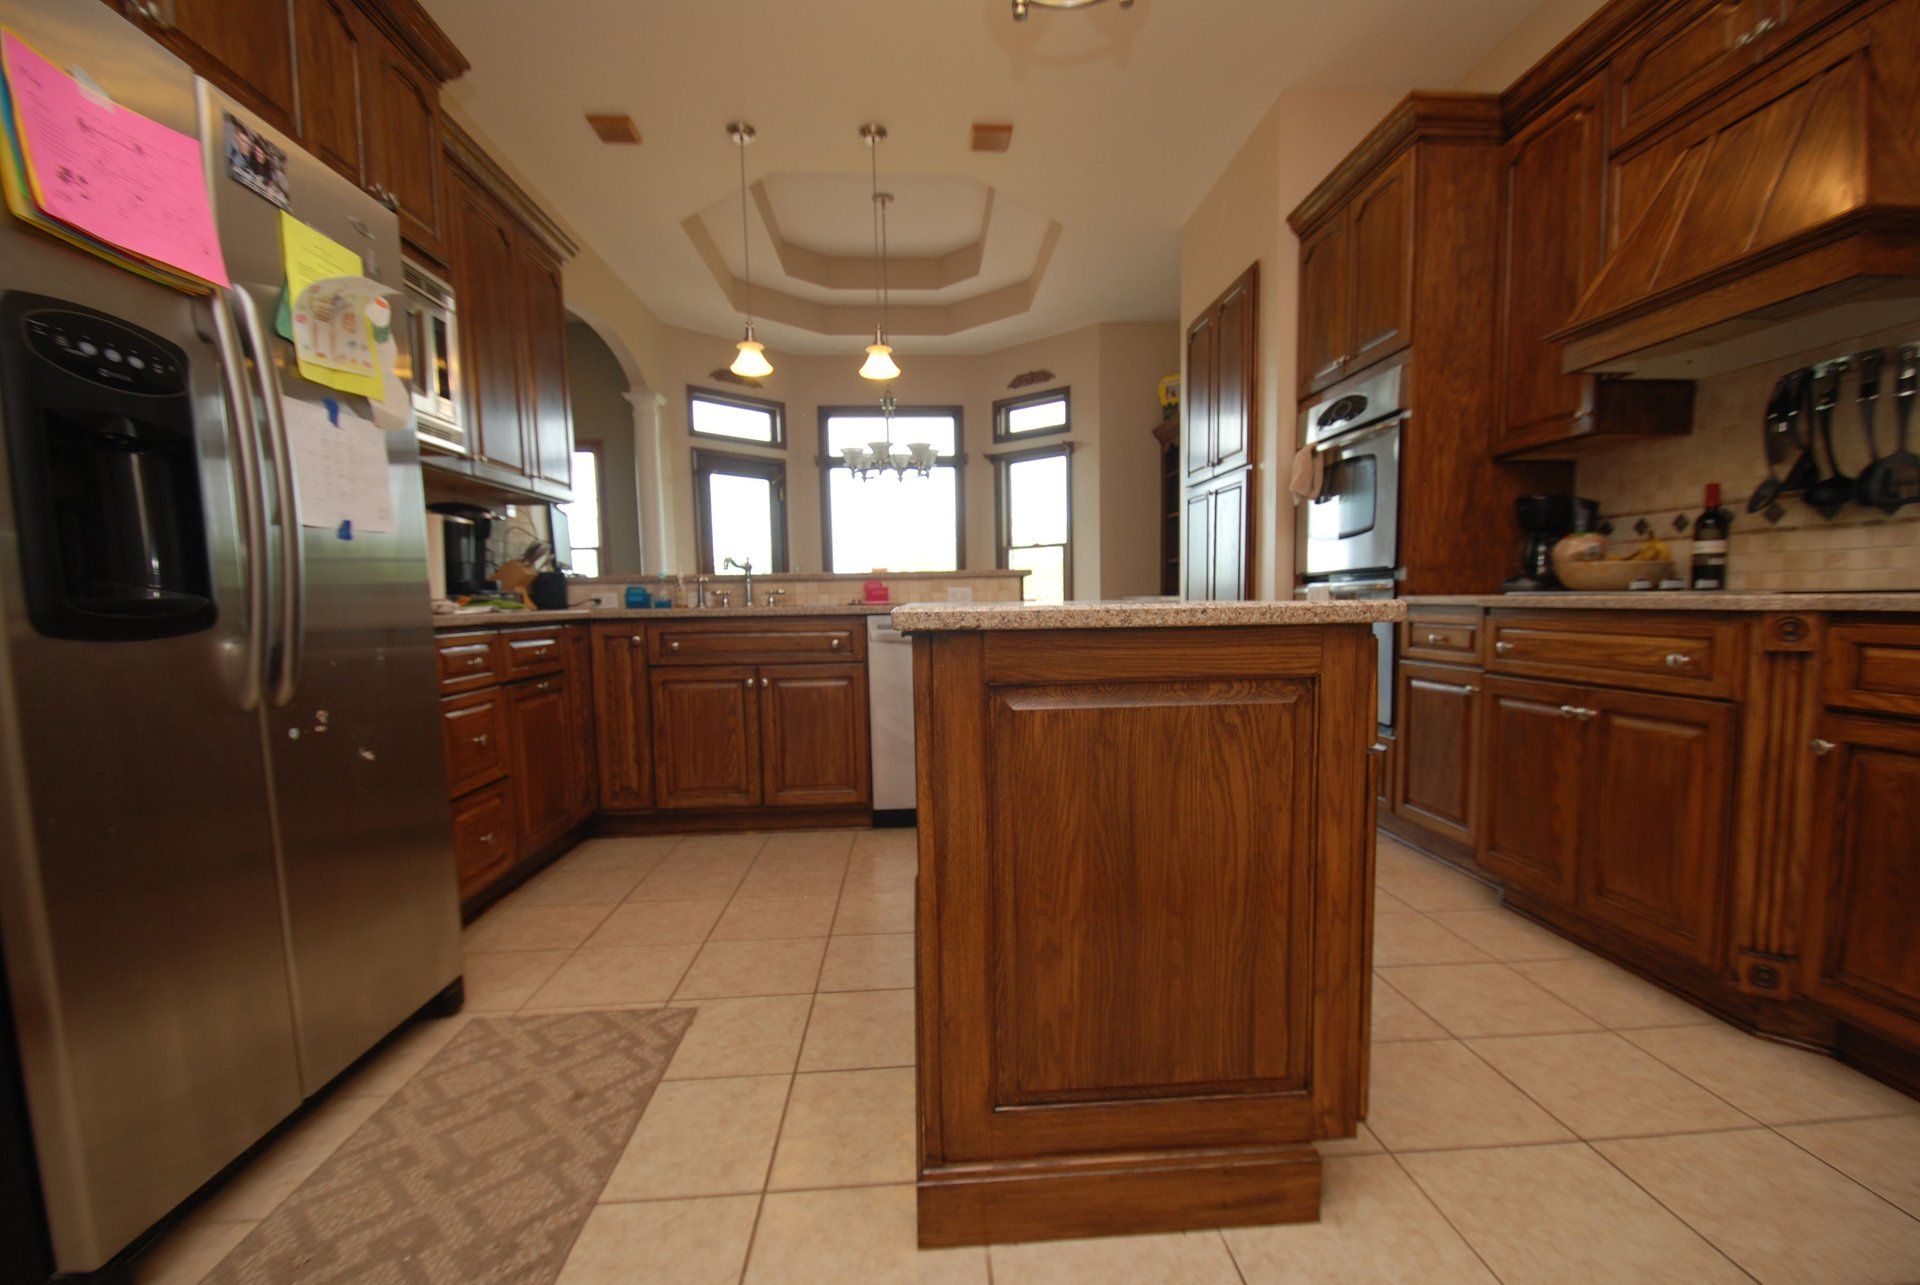 Burbank walnut stained cabinets